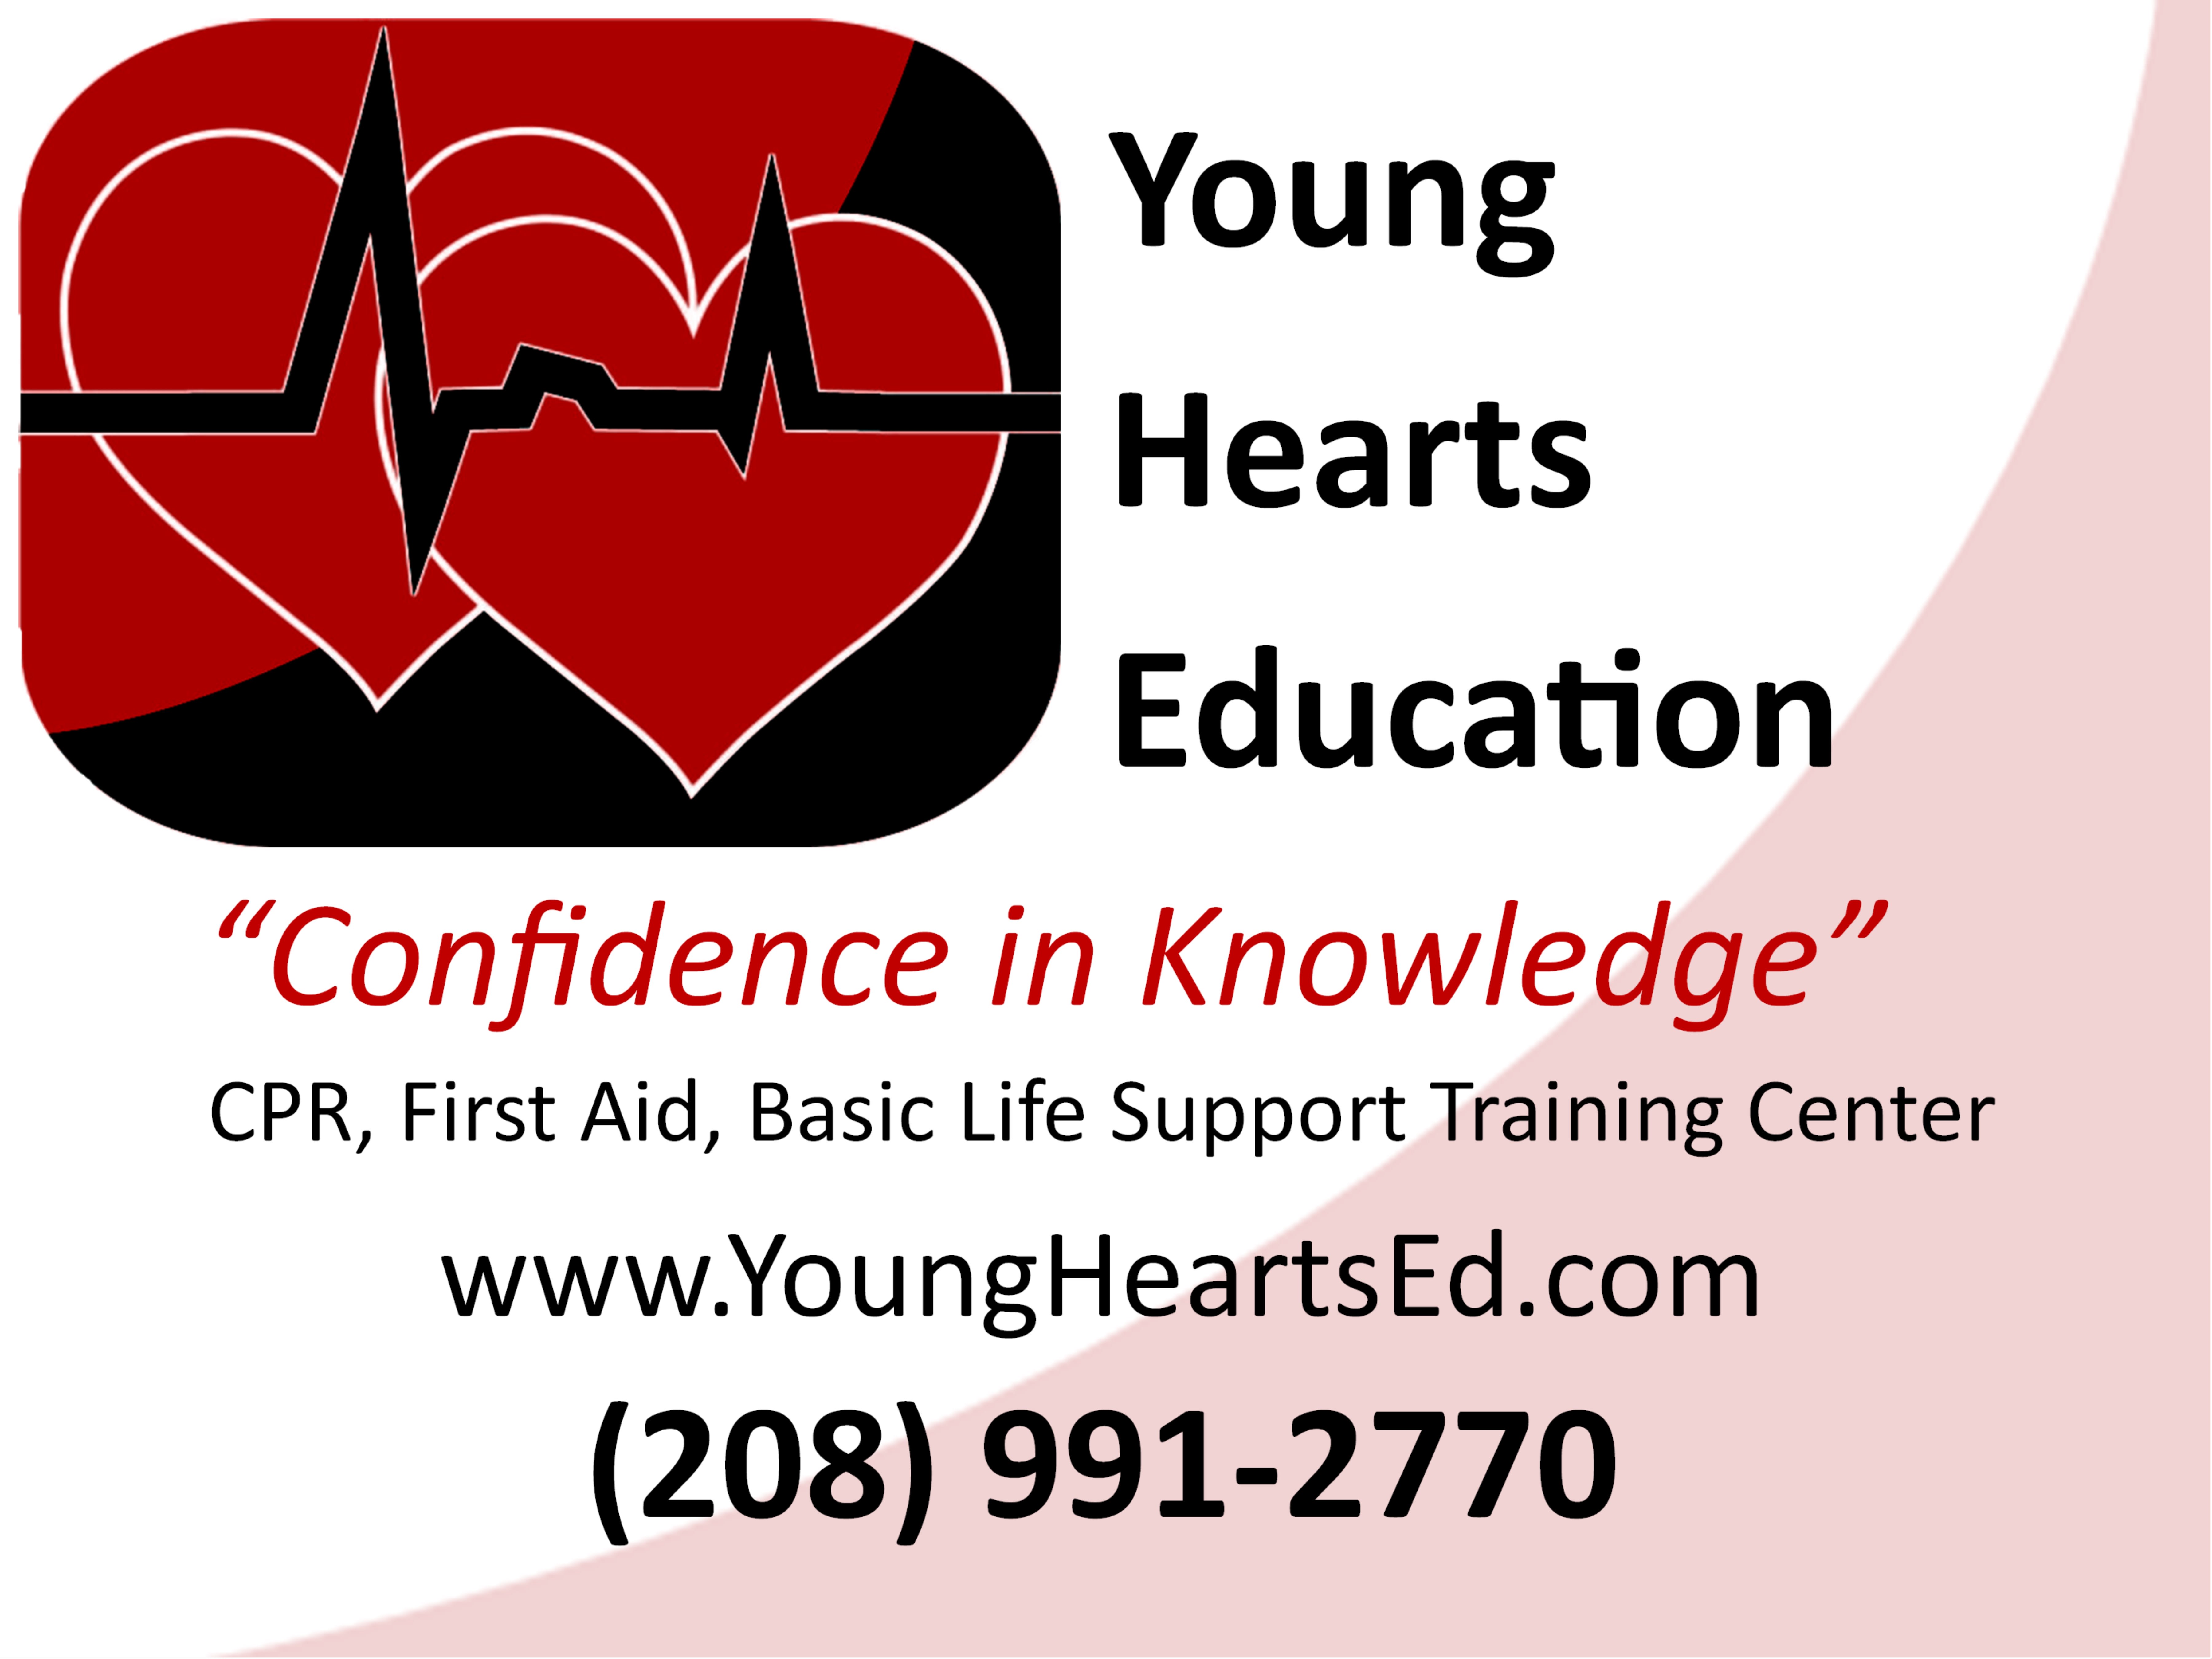 Young Hearts Education